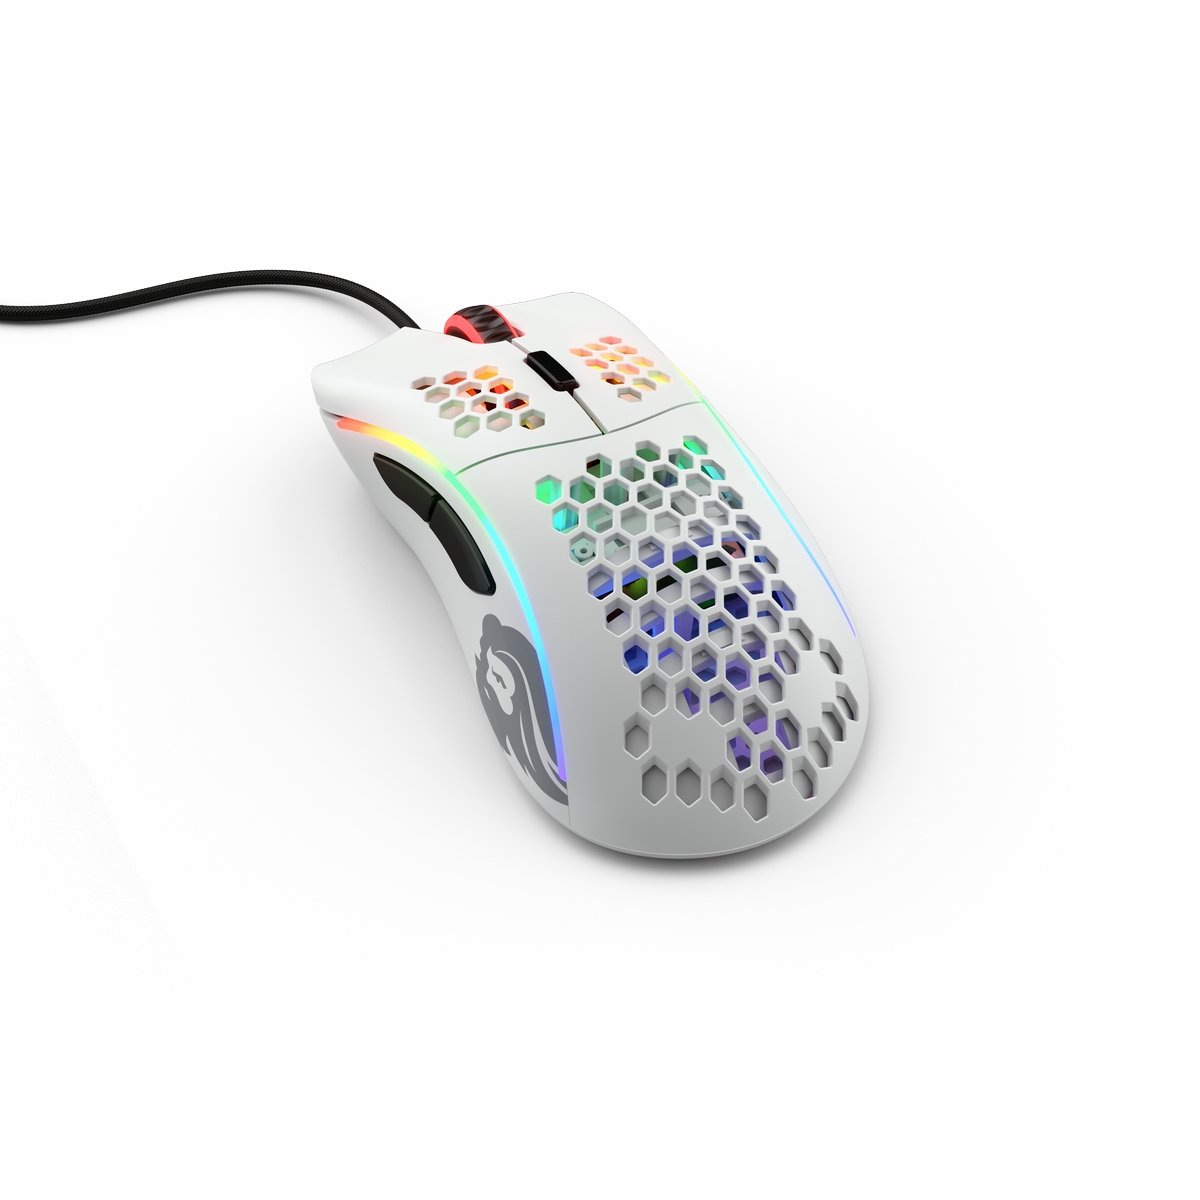 Glorious - Glorious Model D USB RGB Optical Gaming Mouse - Matte White (GD-WHITE)